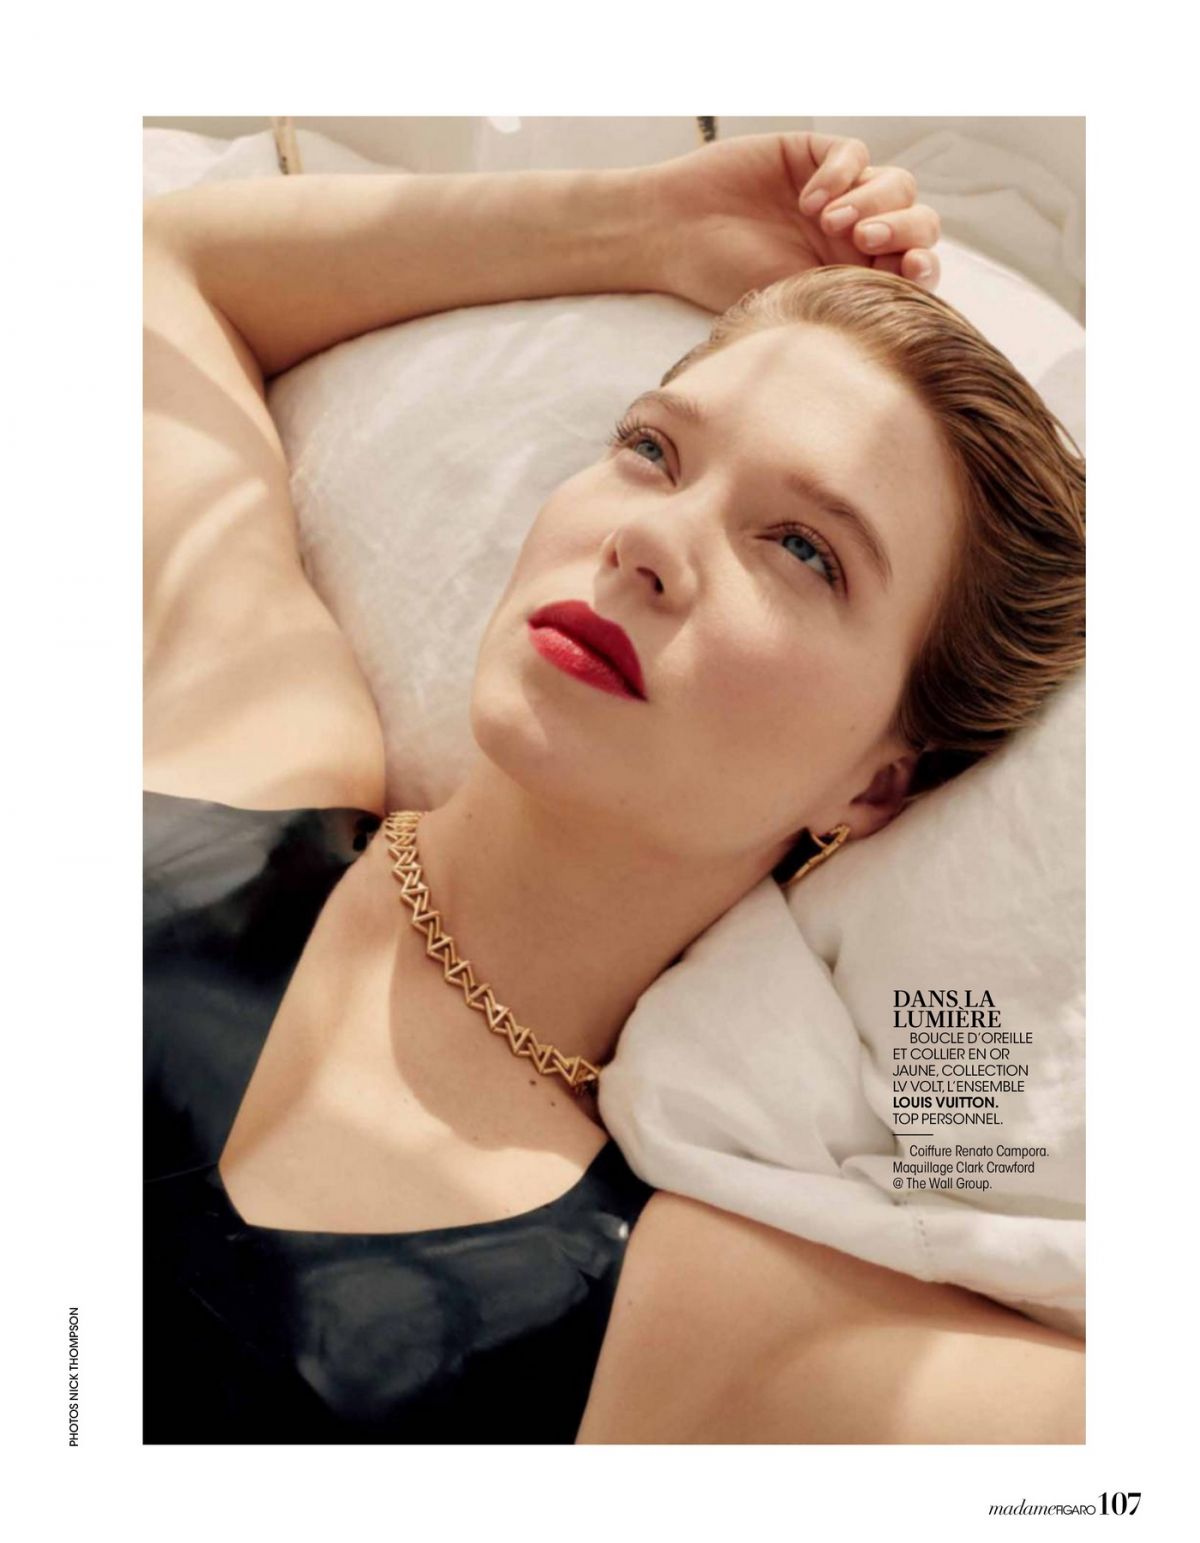 Lea Seydoux in Louis Vuitton for Madame Figaro Cover Story